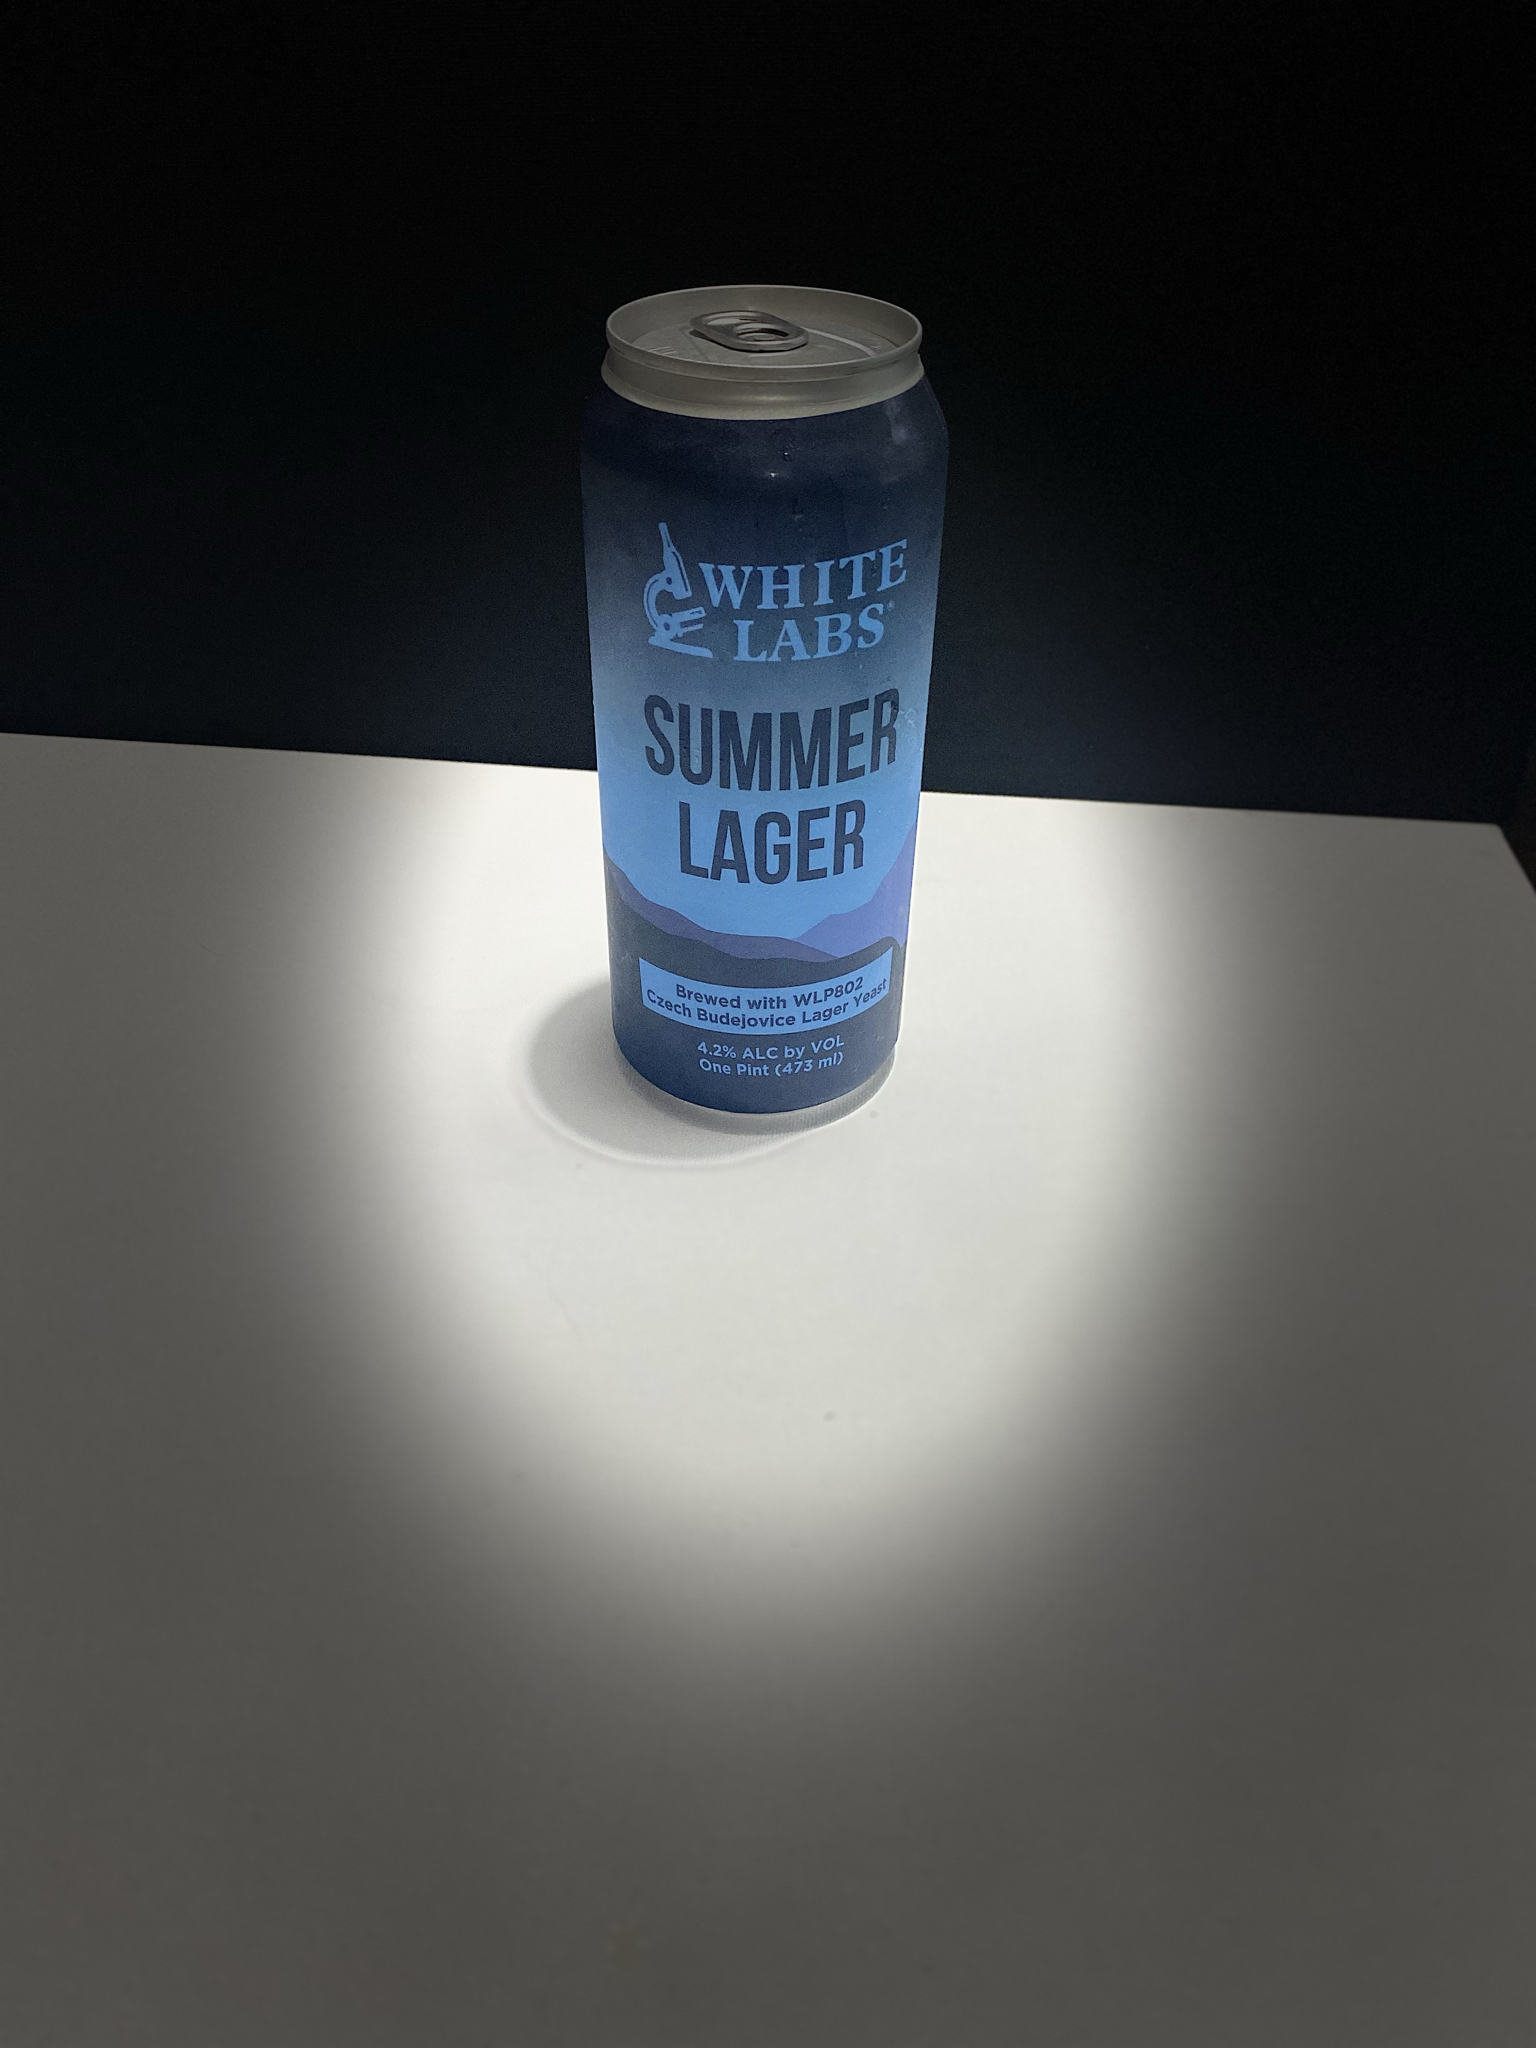 Review Of White Labs Gluten Free Beer By GlutenFreeBeerLovers.com